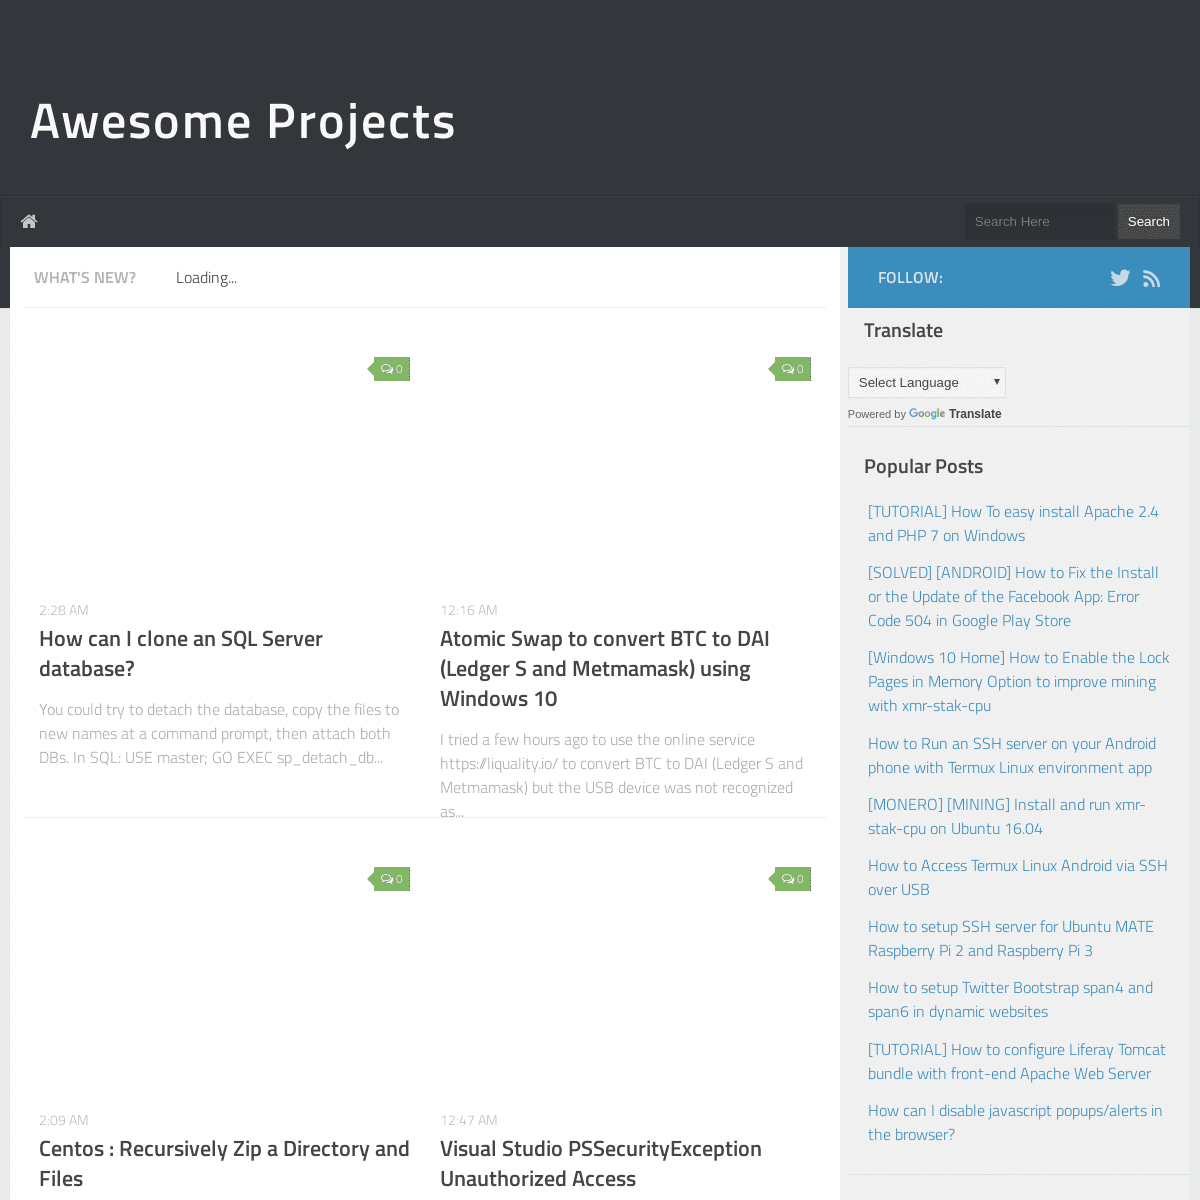 A complete backup of awesomeprojectsxyz.blogspot.com